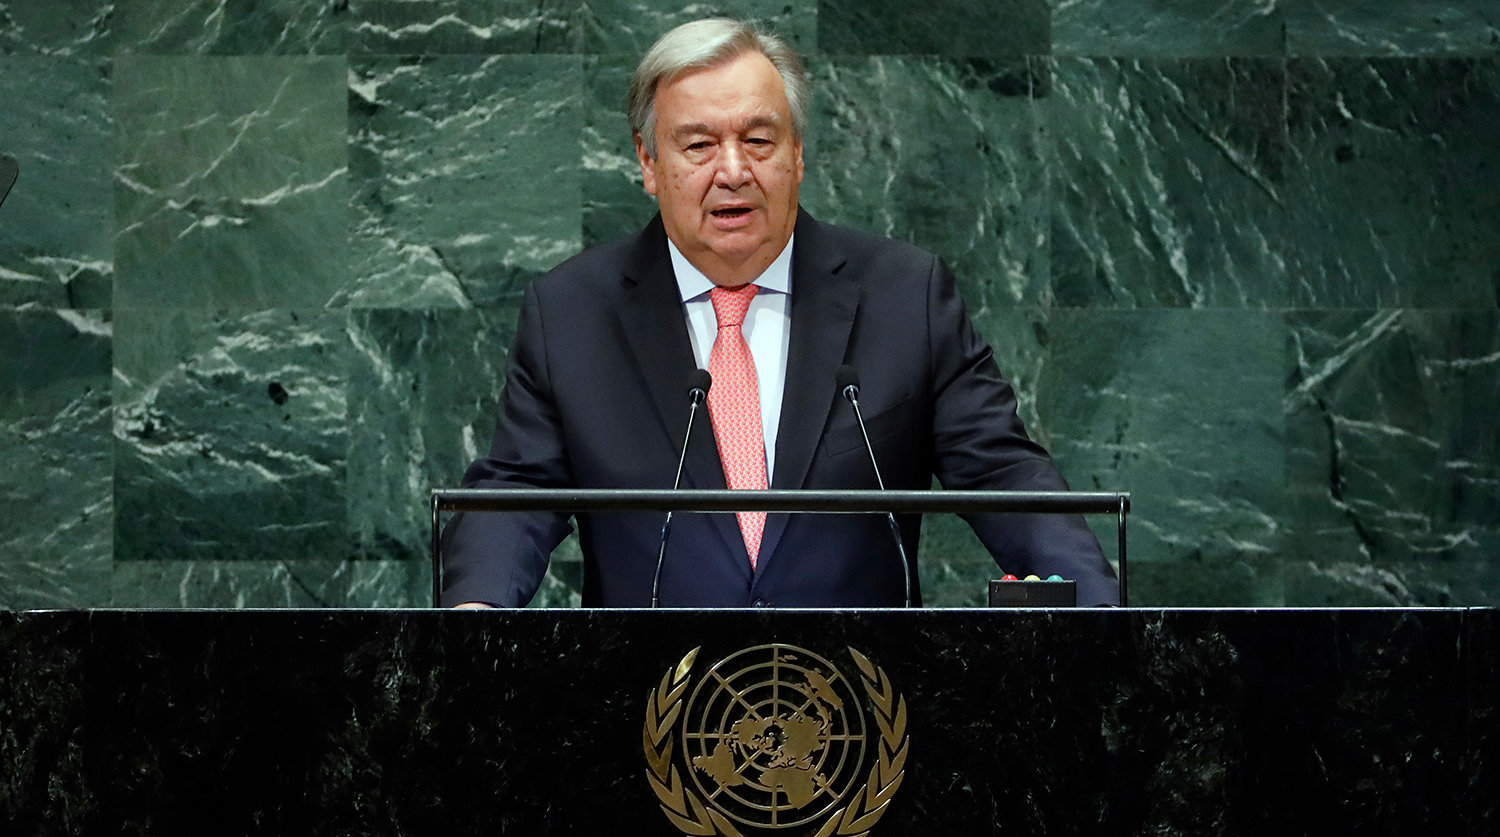 U.N. Secretary General Antonio Guterres addresses the 73rd session of the United Nations General Assembly, at U.N. headquarters, Tuesday, Sept. 25, 2018. (AP Photo/Richard Drew)